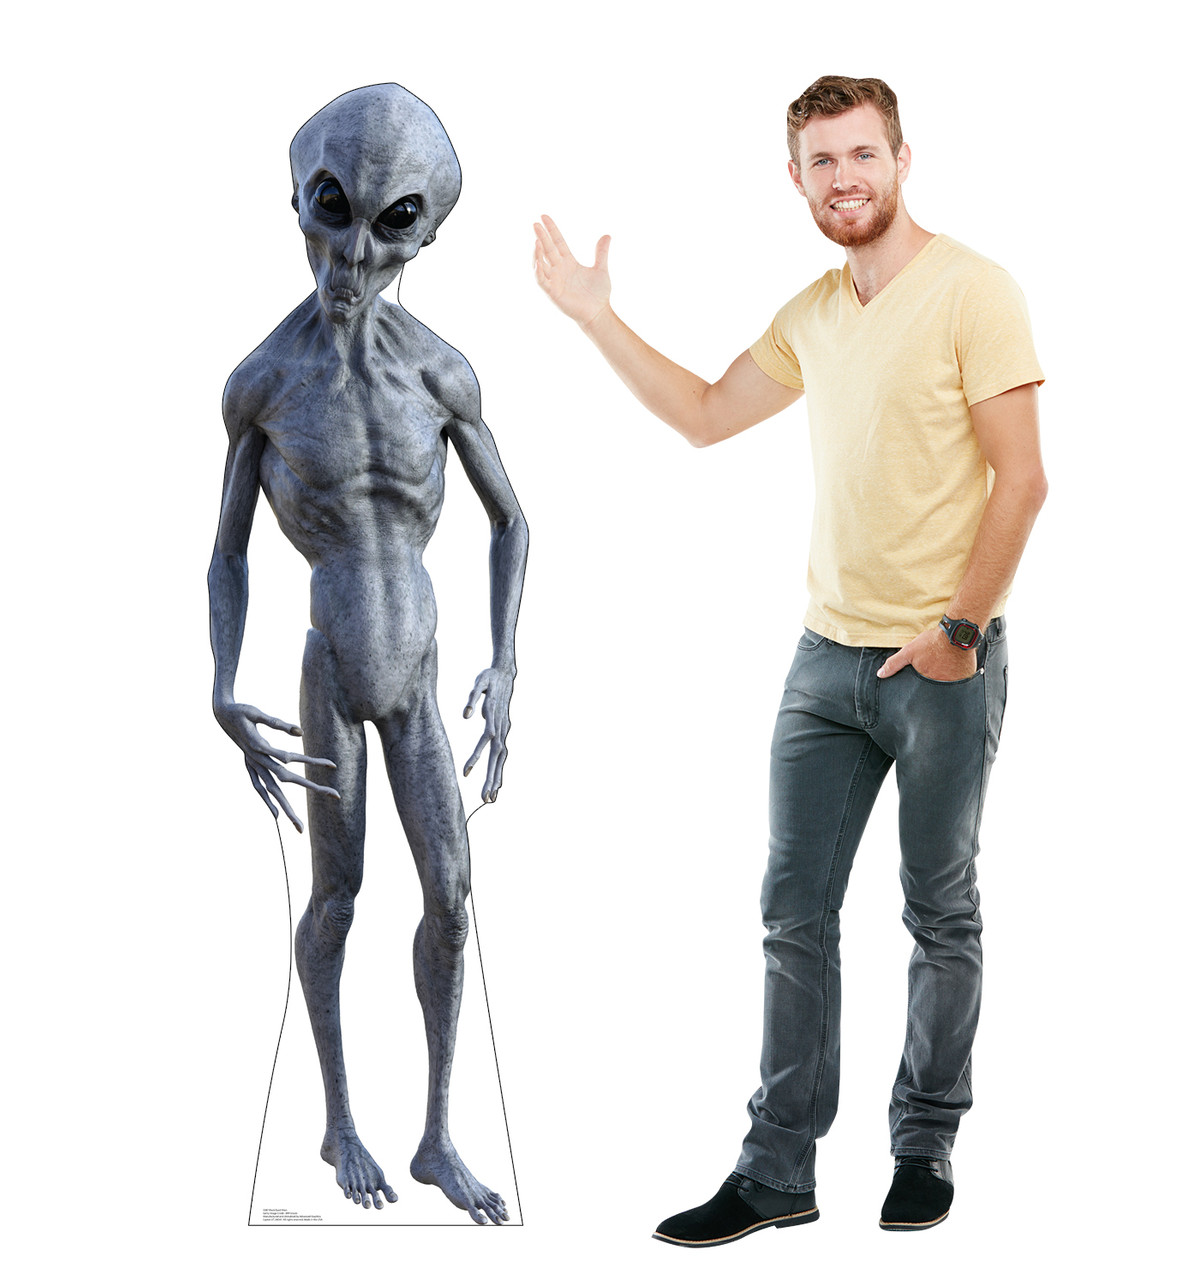 Life-size cardboard standee of a Black Eyed Alien with model.